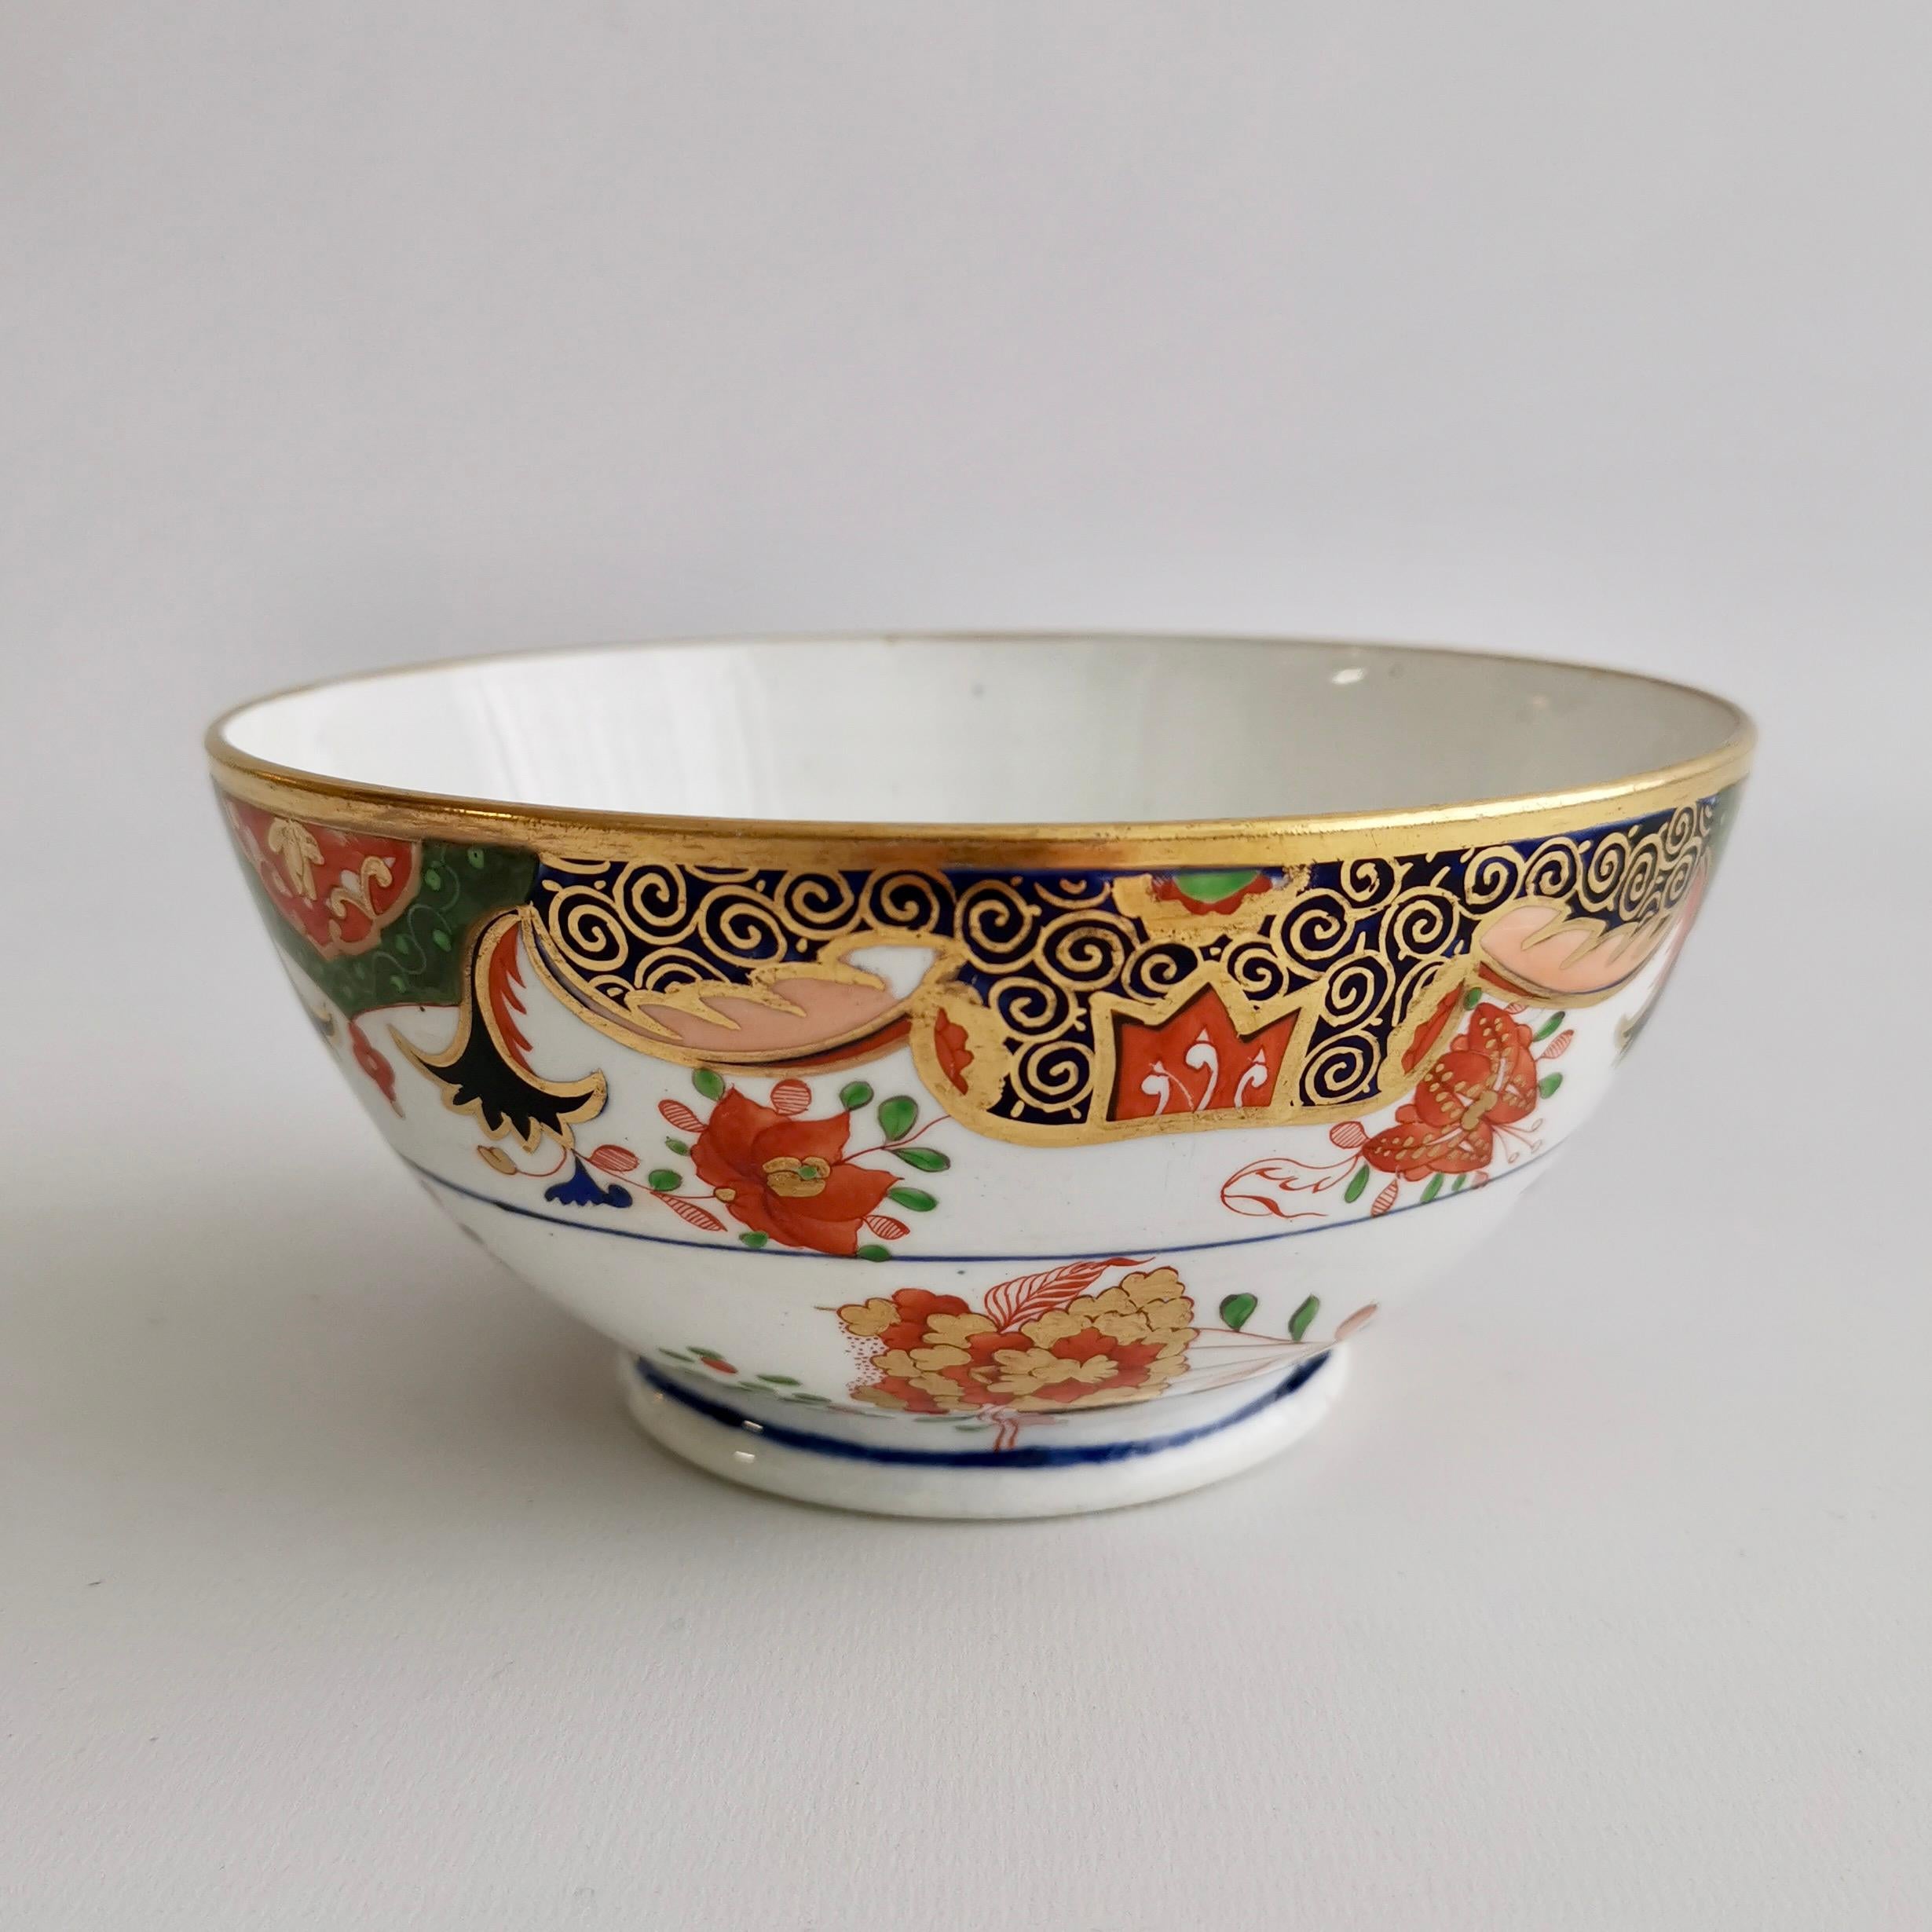 This is a beautiful slop bowl can made by Spode around 1815. The bowl is decorated in the famous Imari Tobacco Leaf pattern 967.

I have several other items in this pattern available, please see separate listings.

Josiah Spode was the great